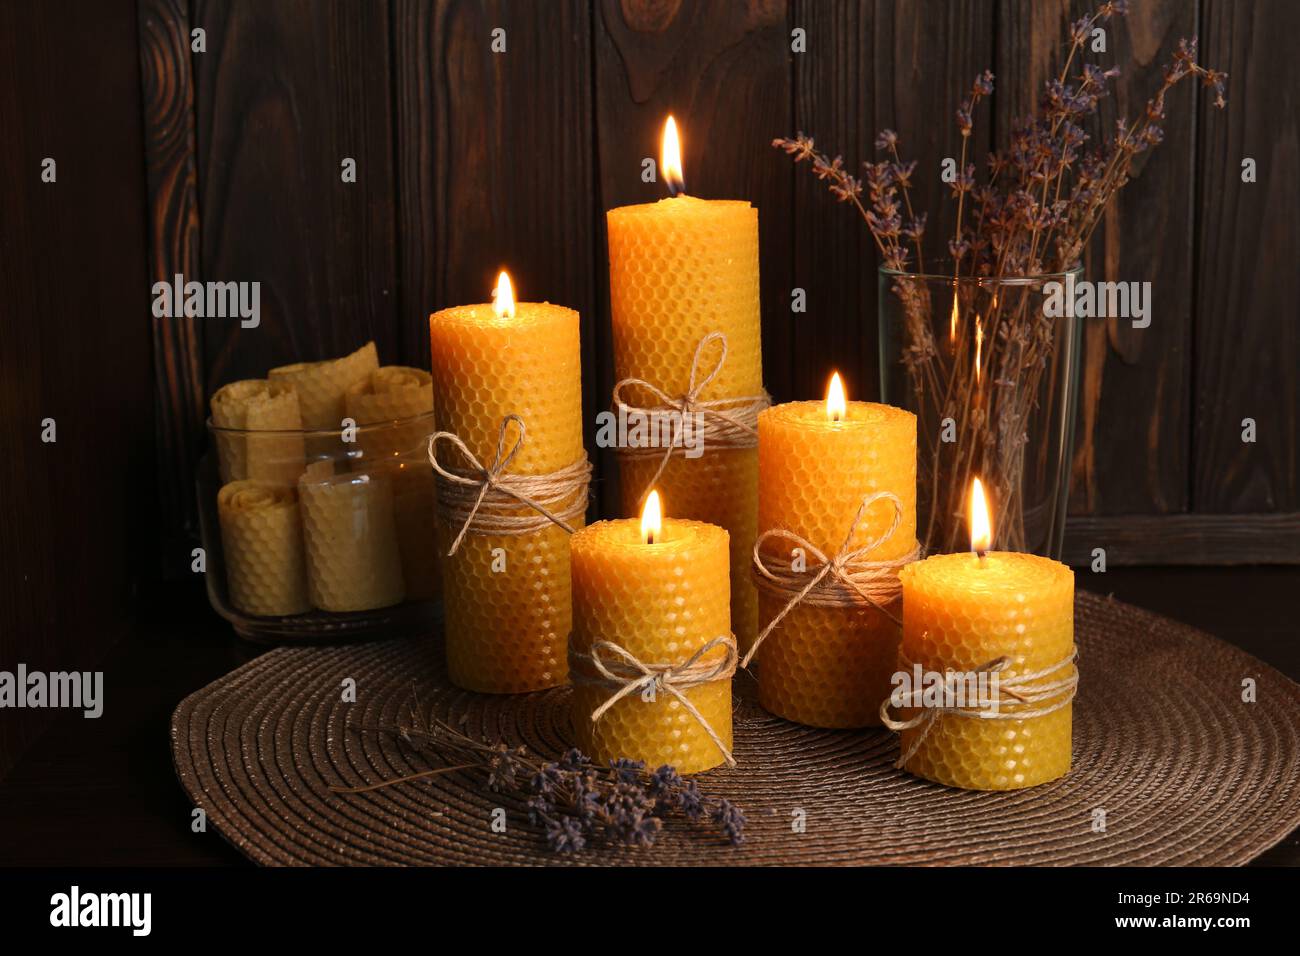 Flower Candle Dry Flowers Stock Photos - 20,520 Images